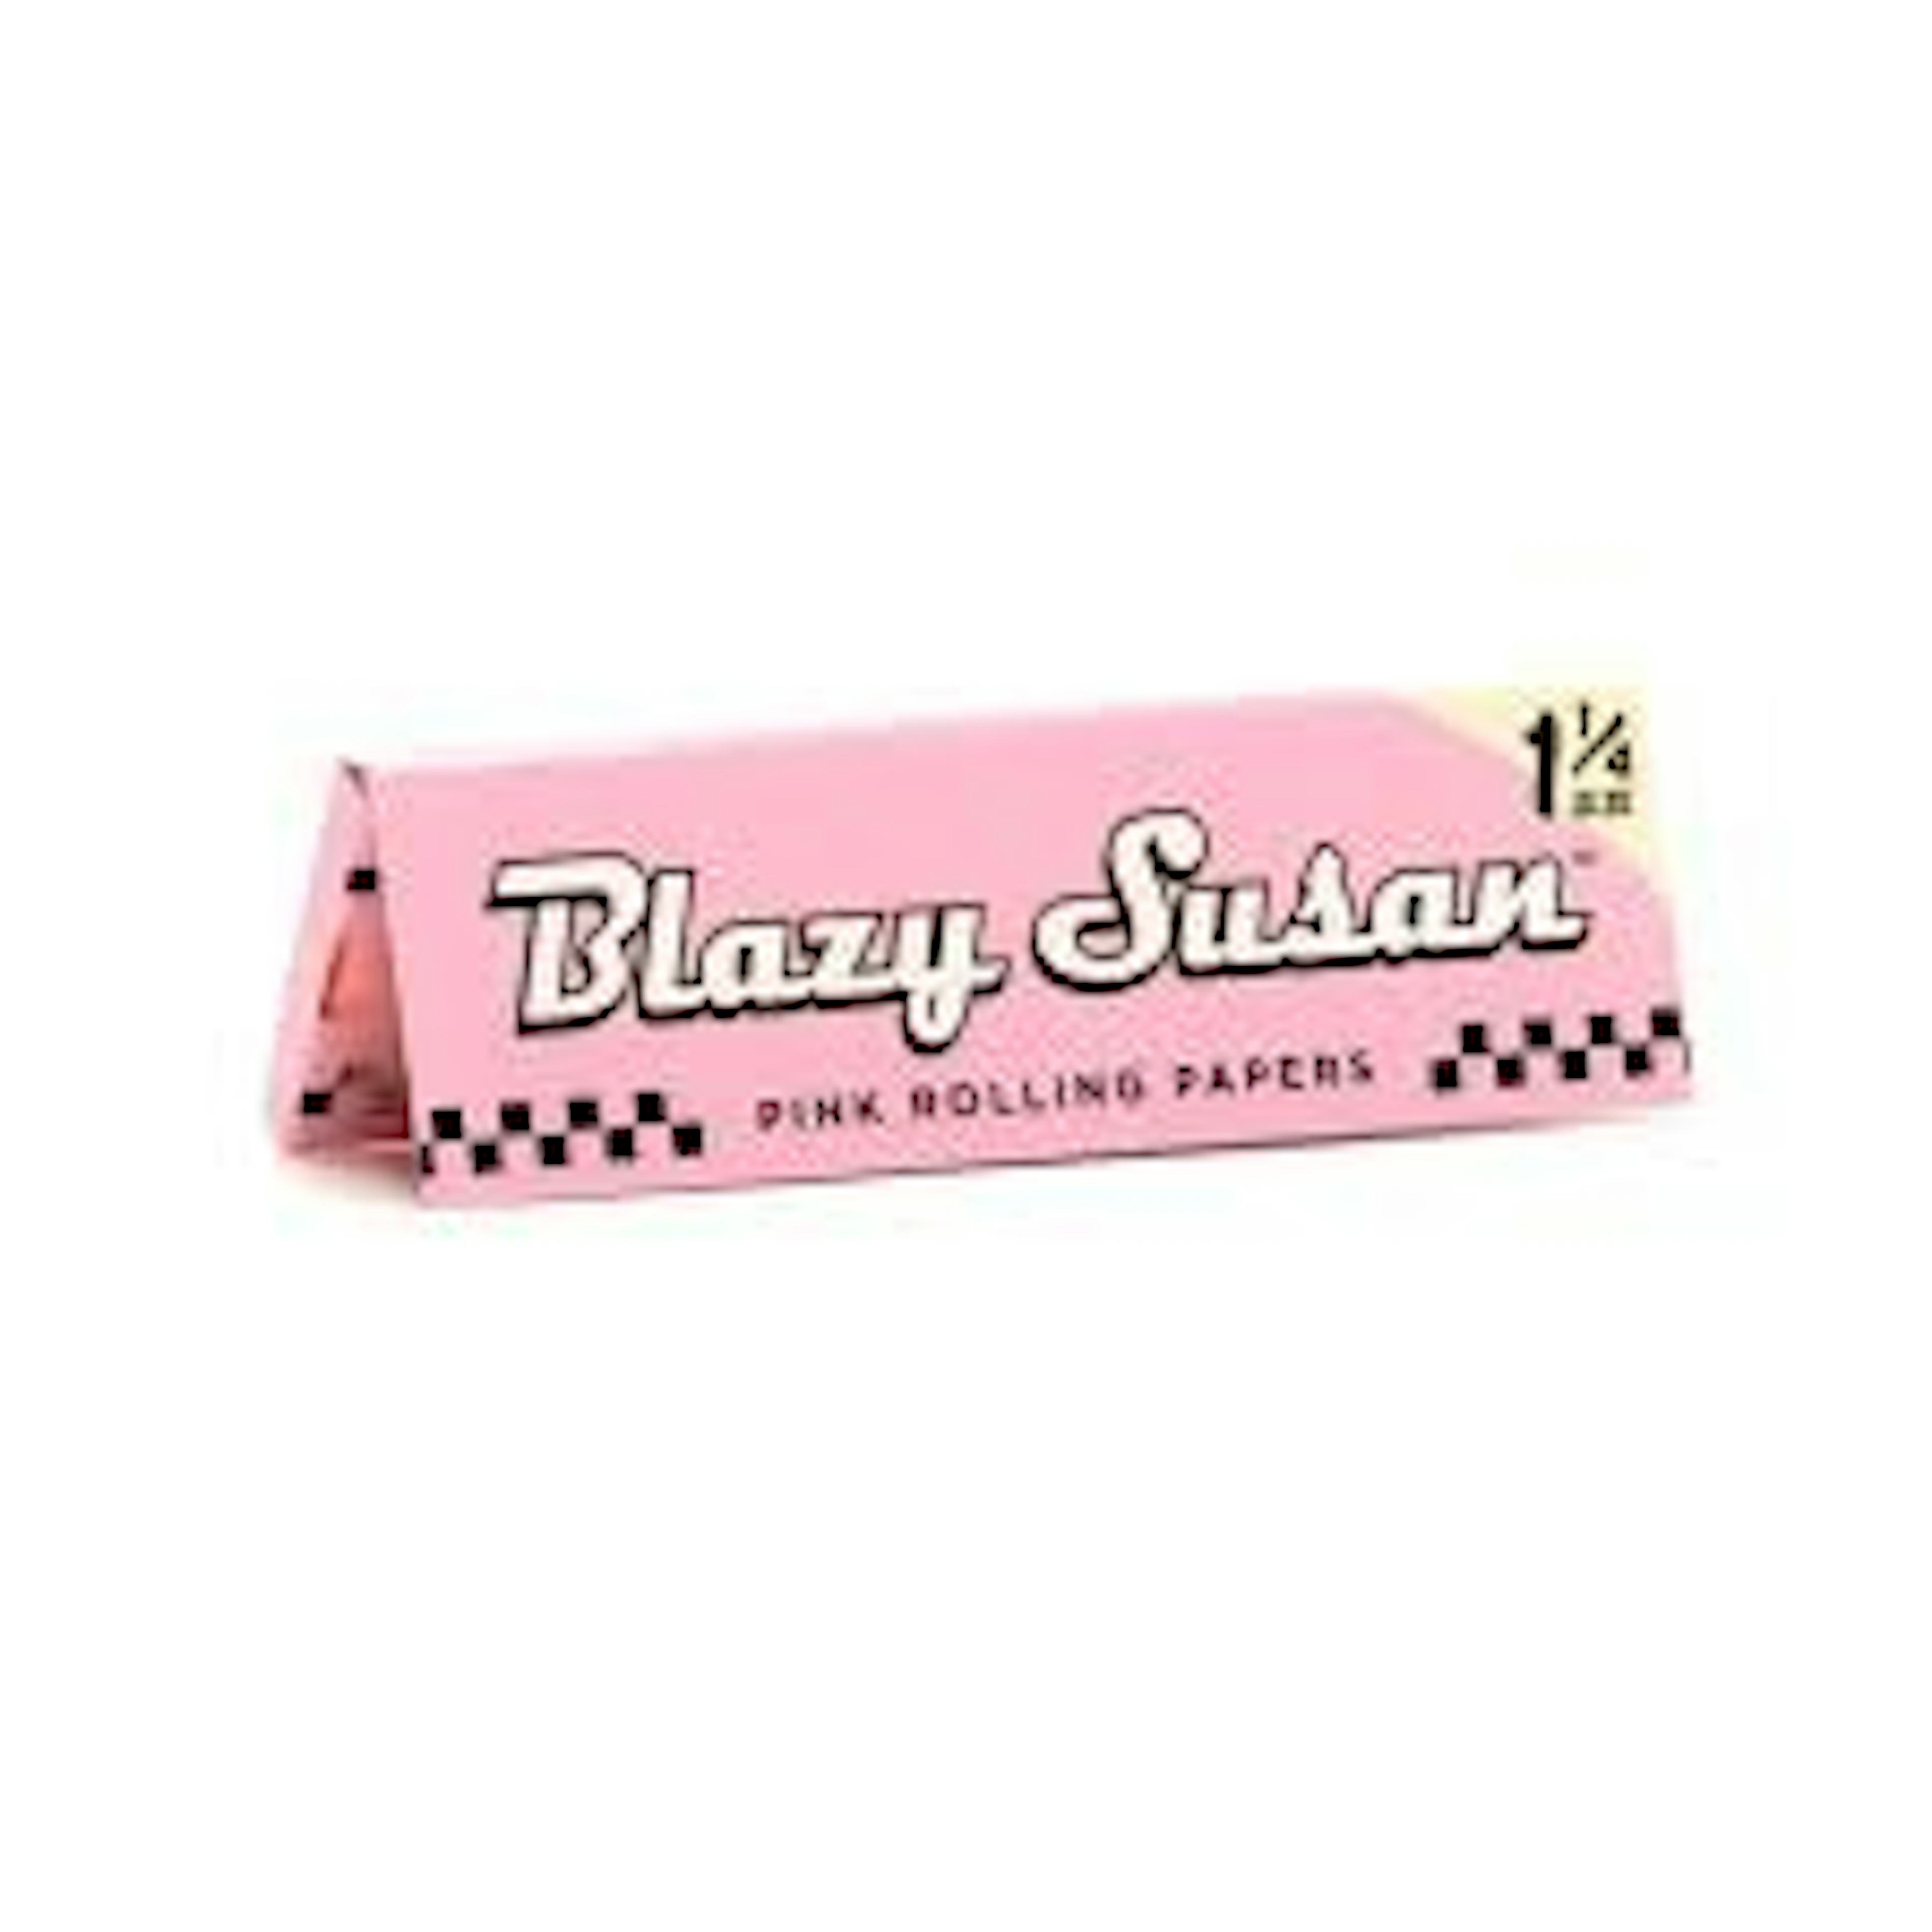 Blazy Susan 1 1/4 Papers